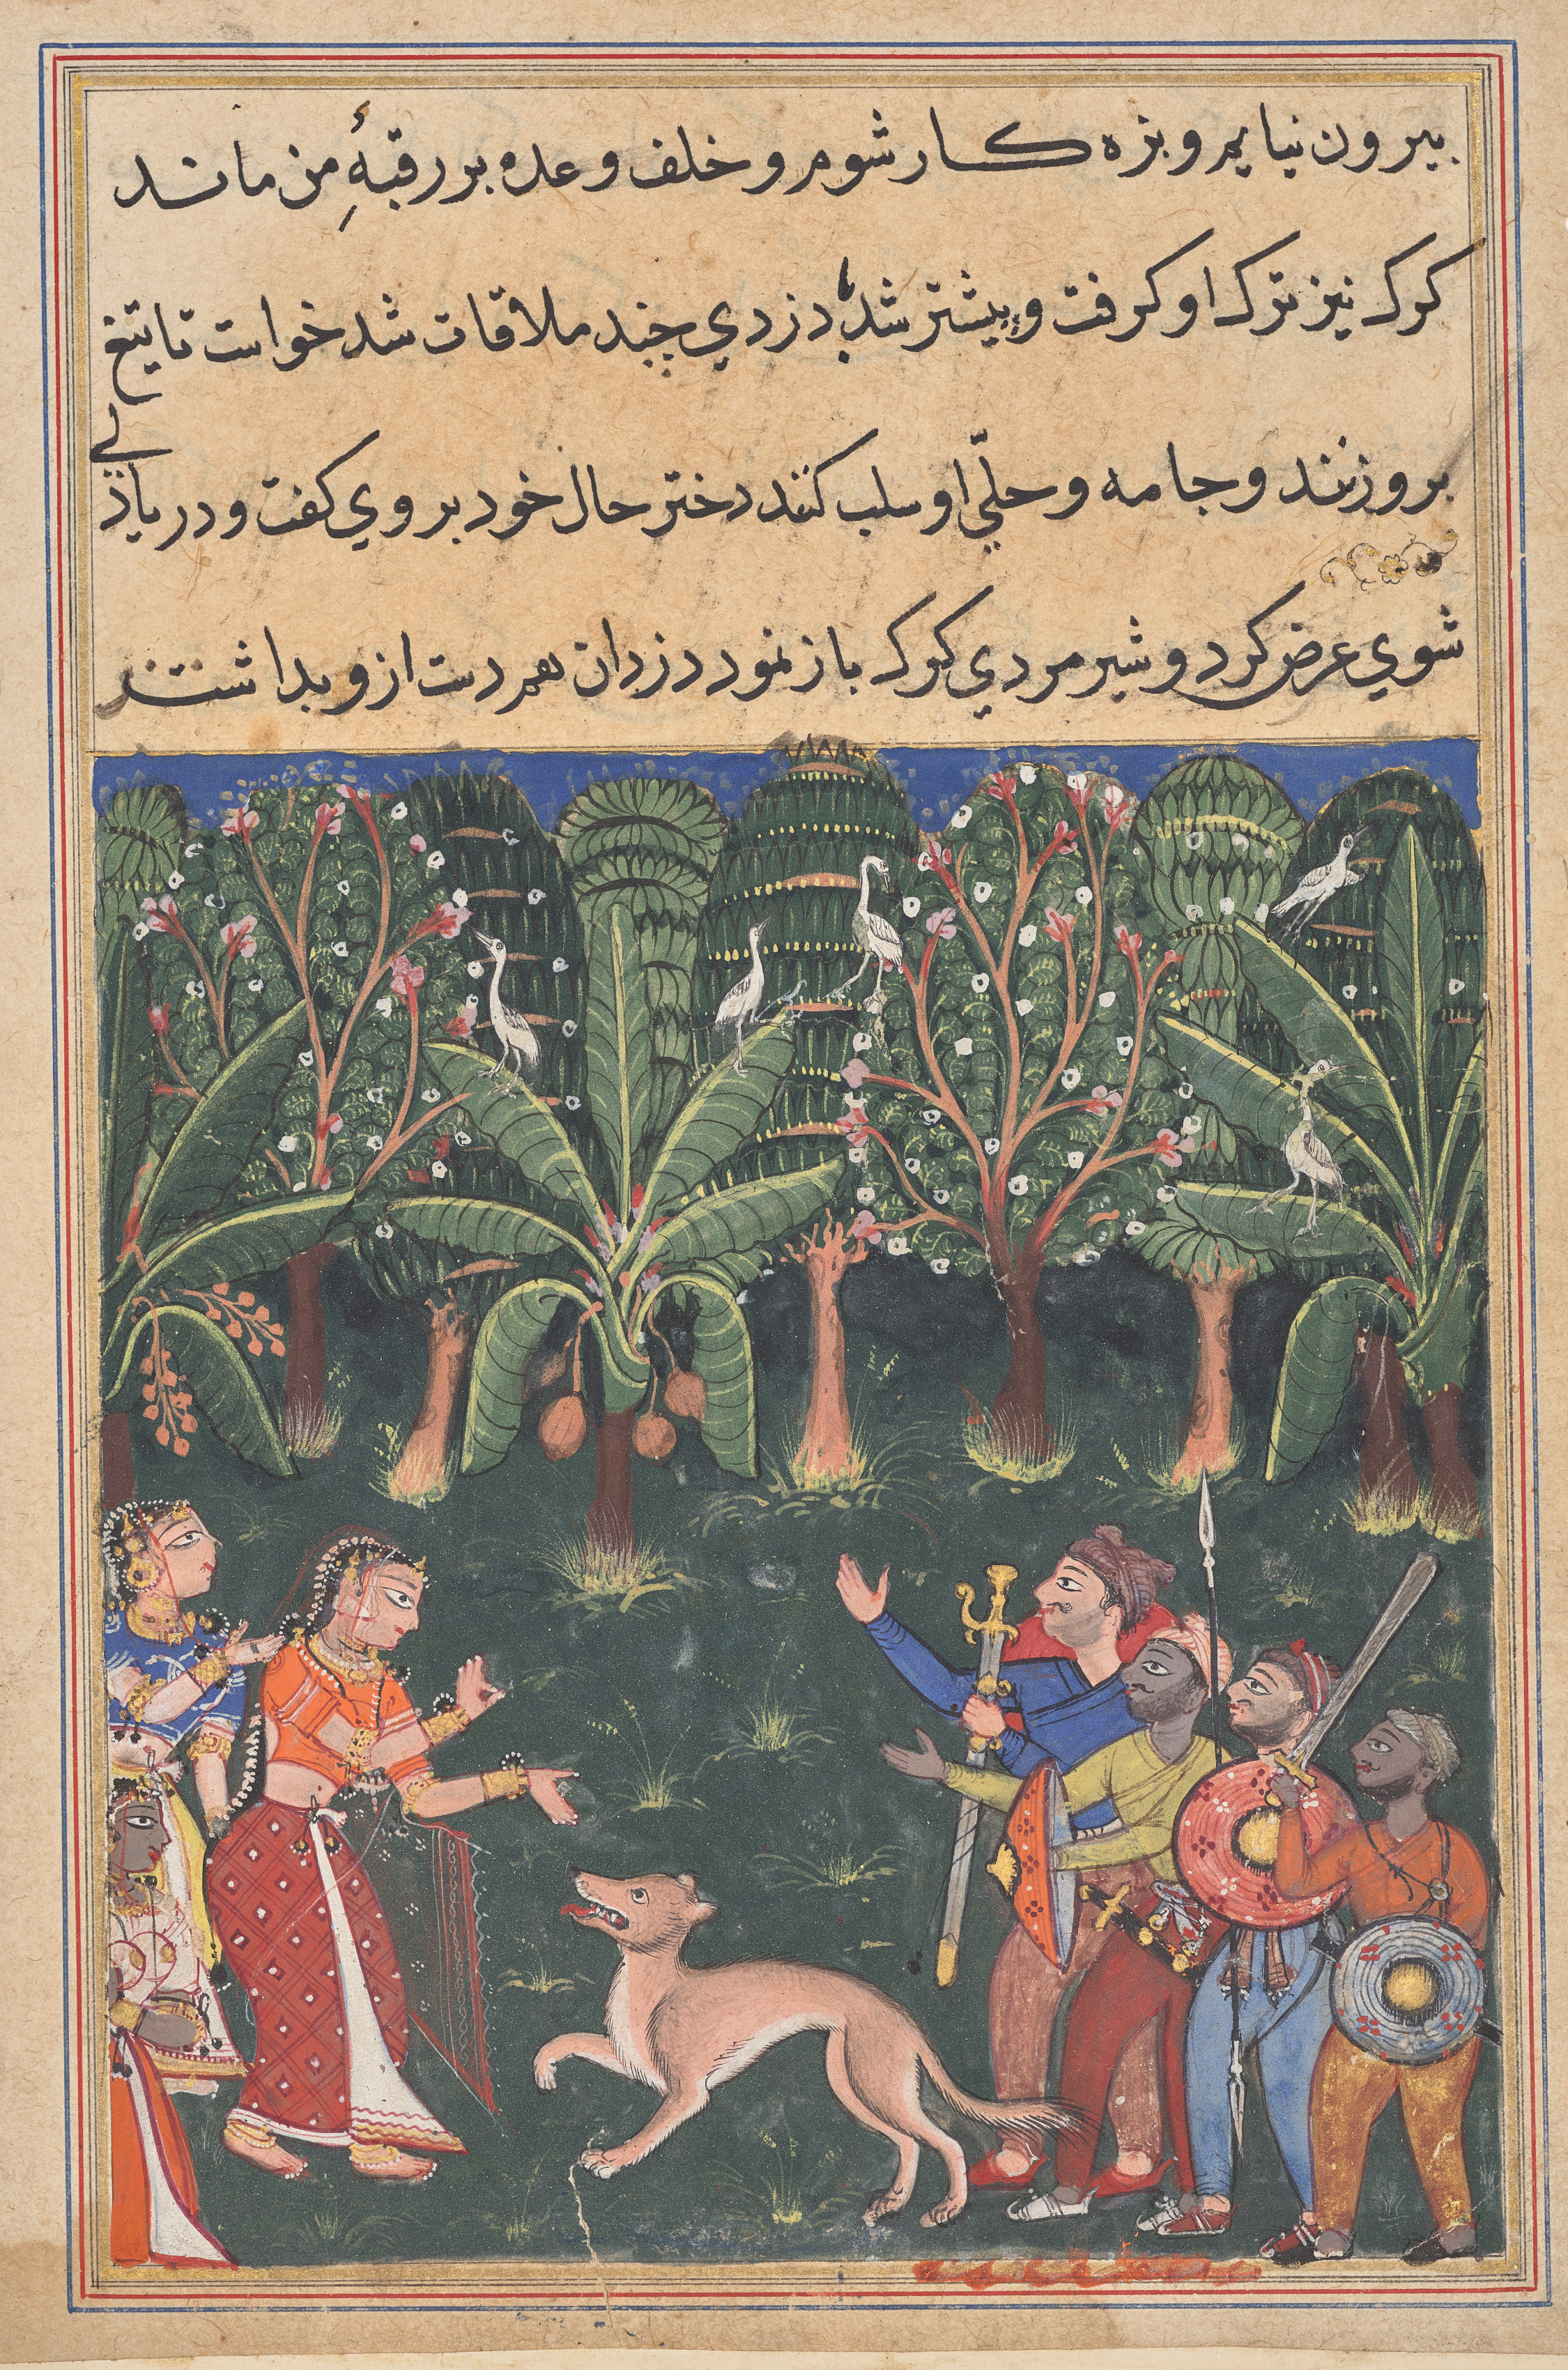 The merchant’s daughter encounters a wolf and bandits on her way to meet the gardener in order to keep her promise, from a Tuti-nama (Tales of a Parrot): Twelfth Night